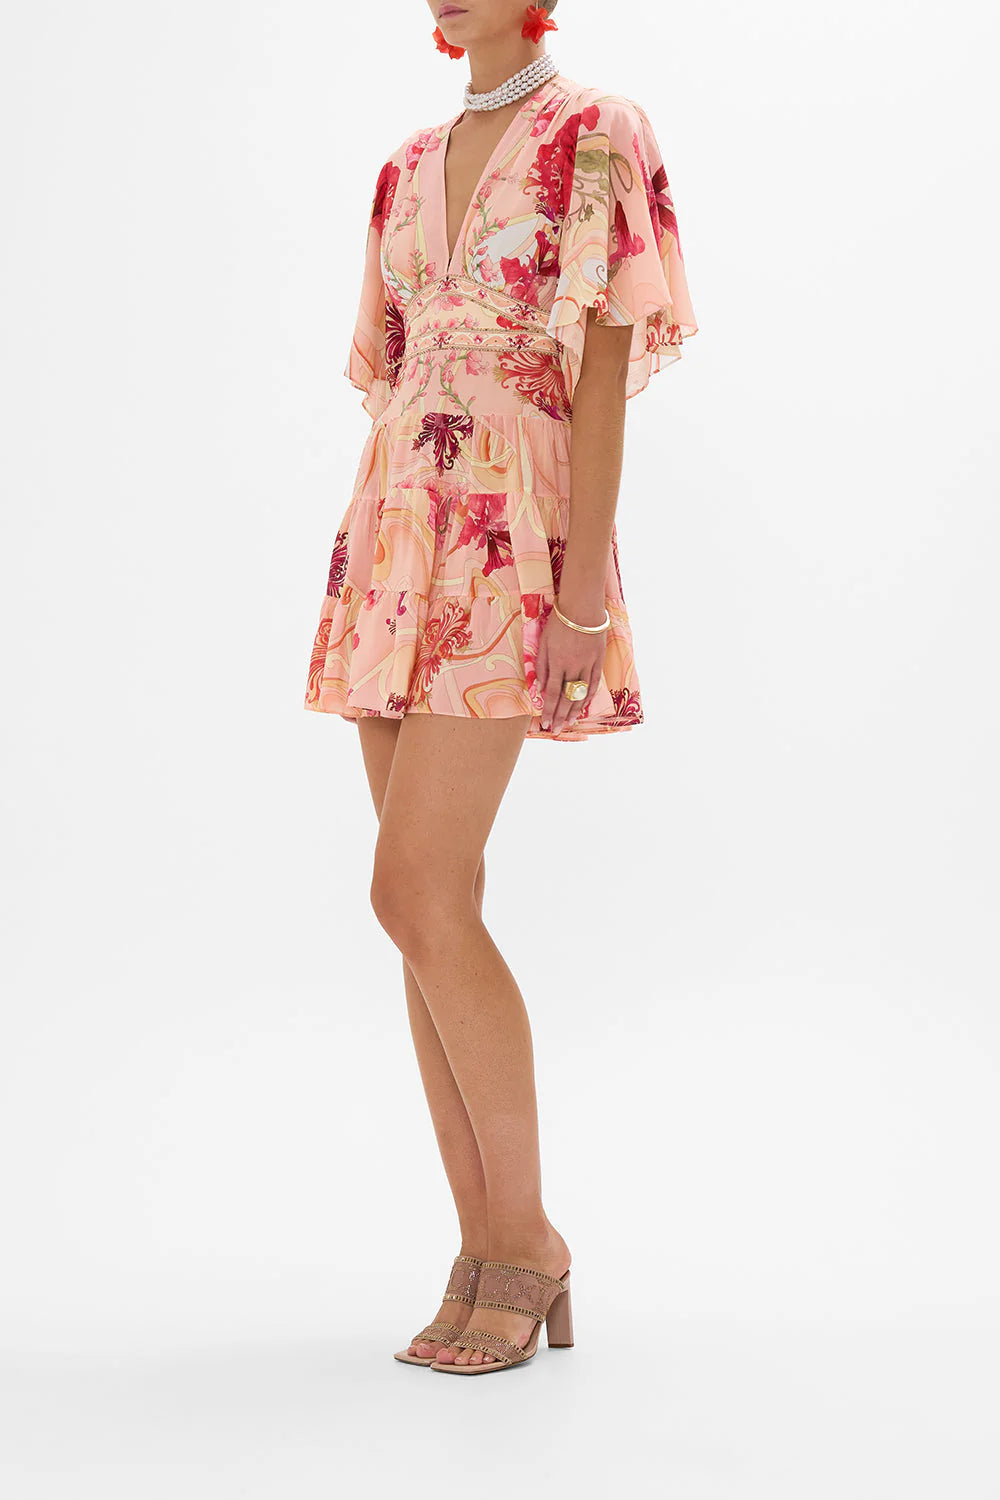 Tiered Skirt Mini Dress Blossoms and Brushstrokes - Camilla